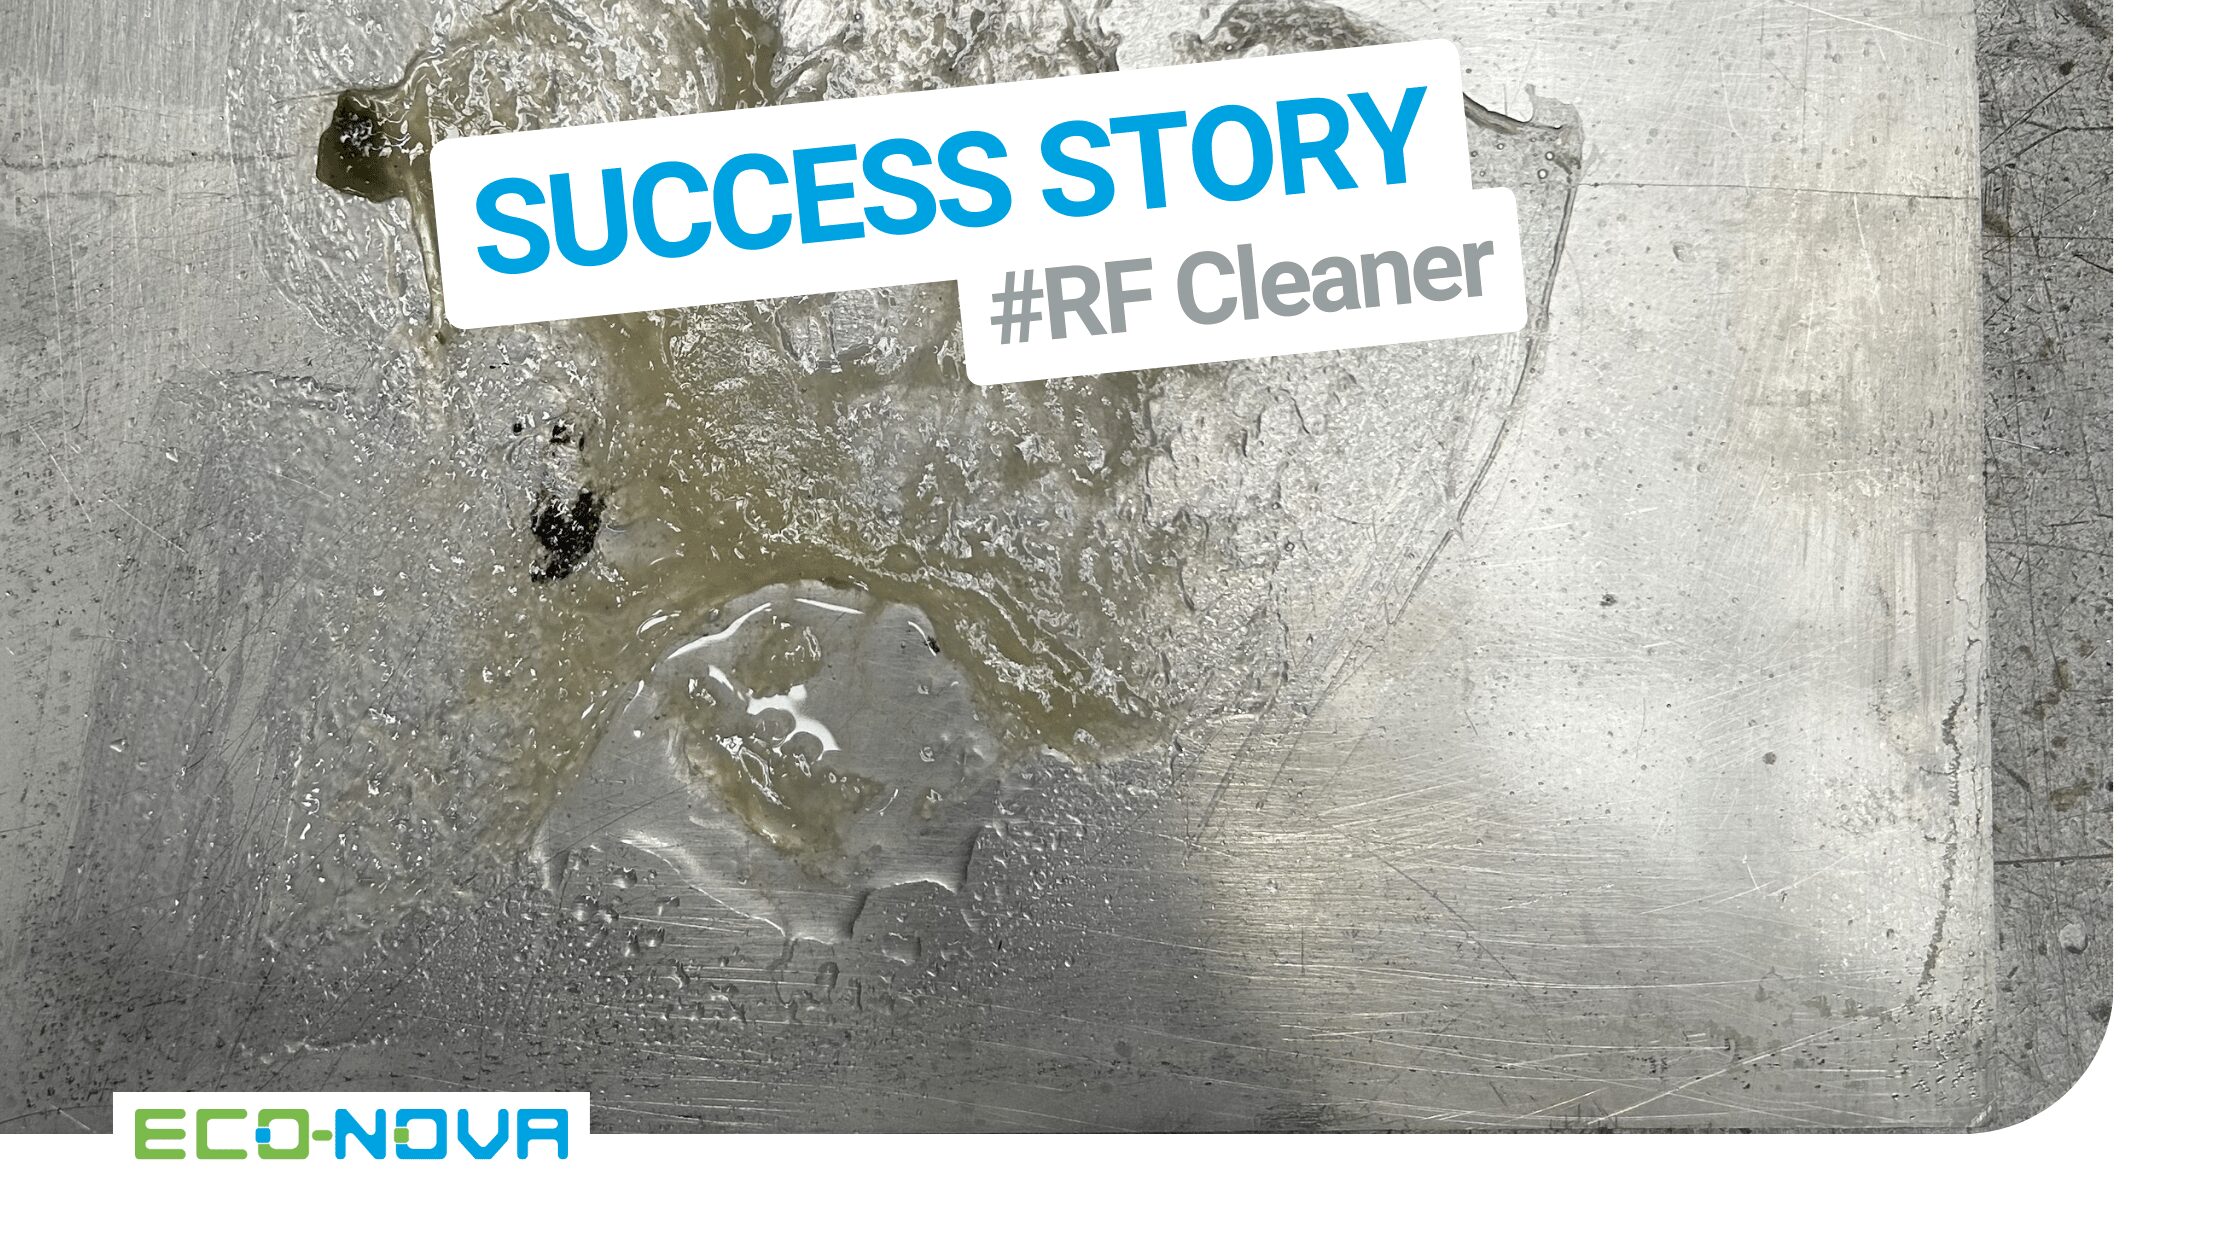 Removal of oil-wax-rubber deposits with RF Cleaner